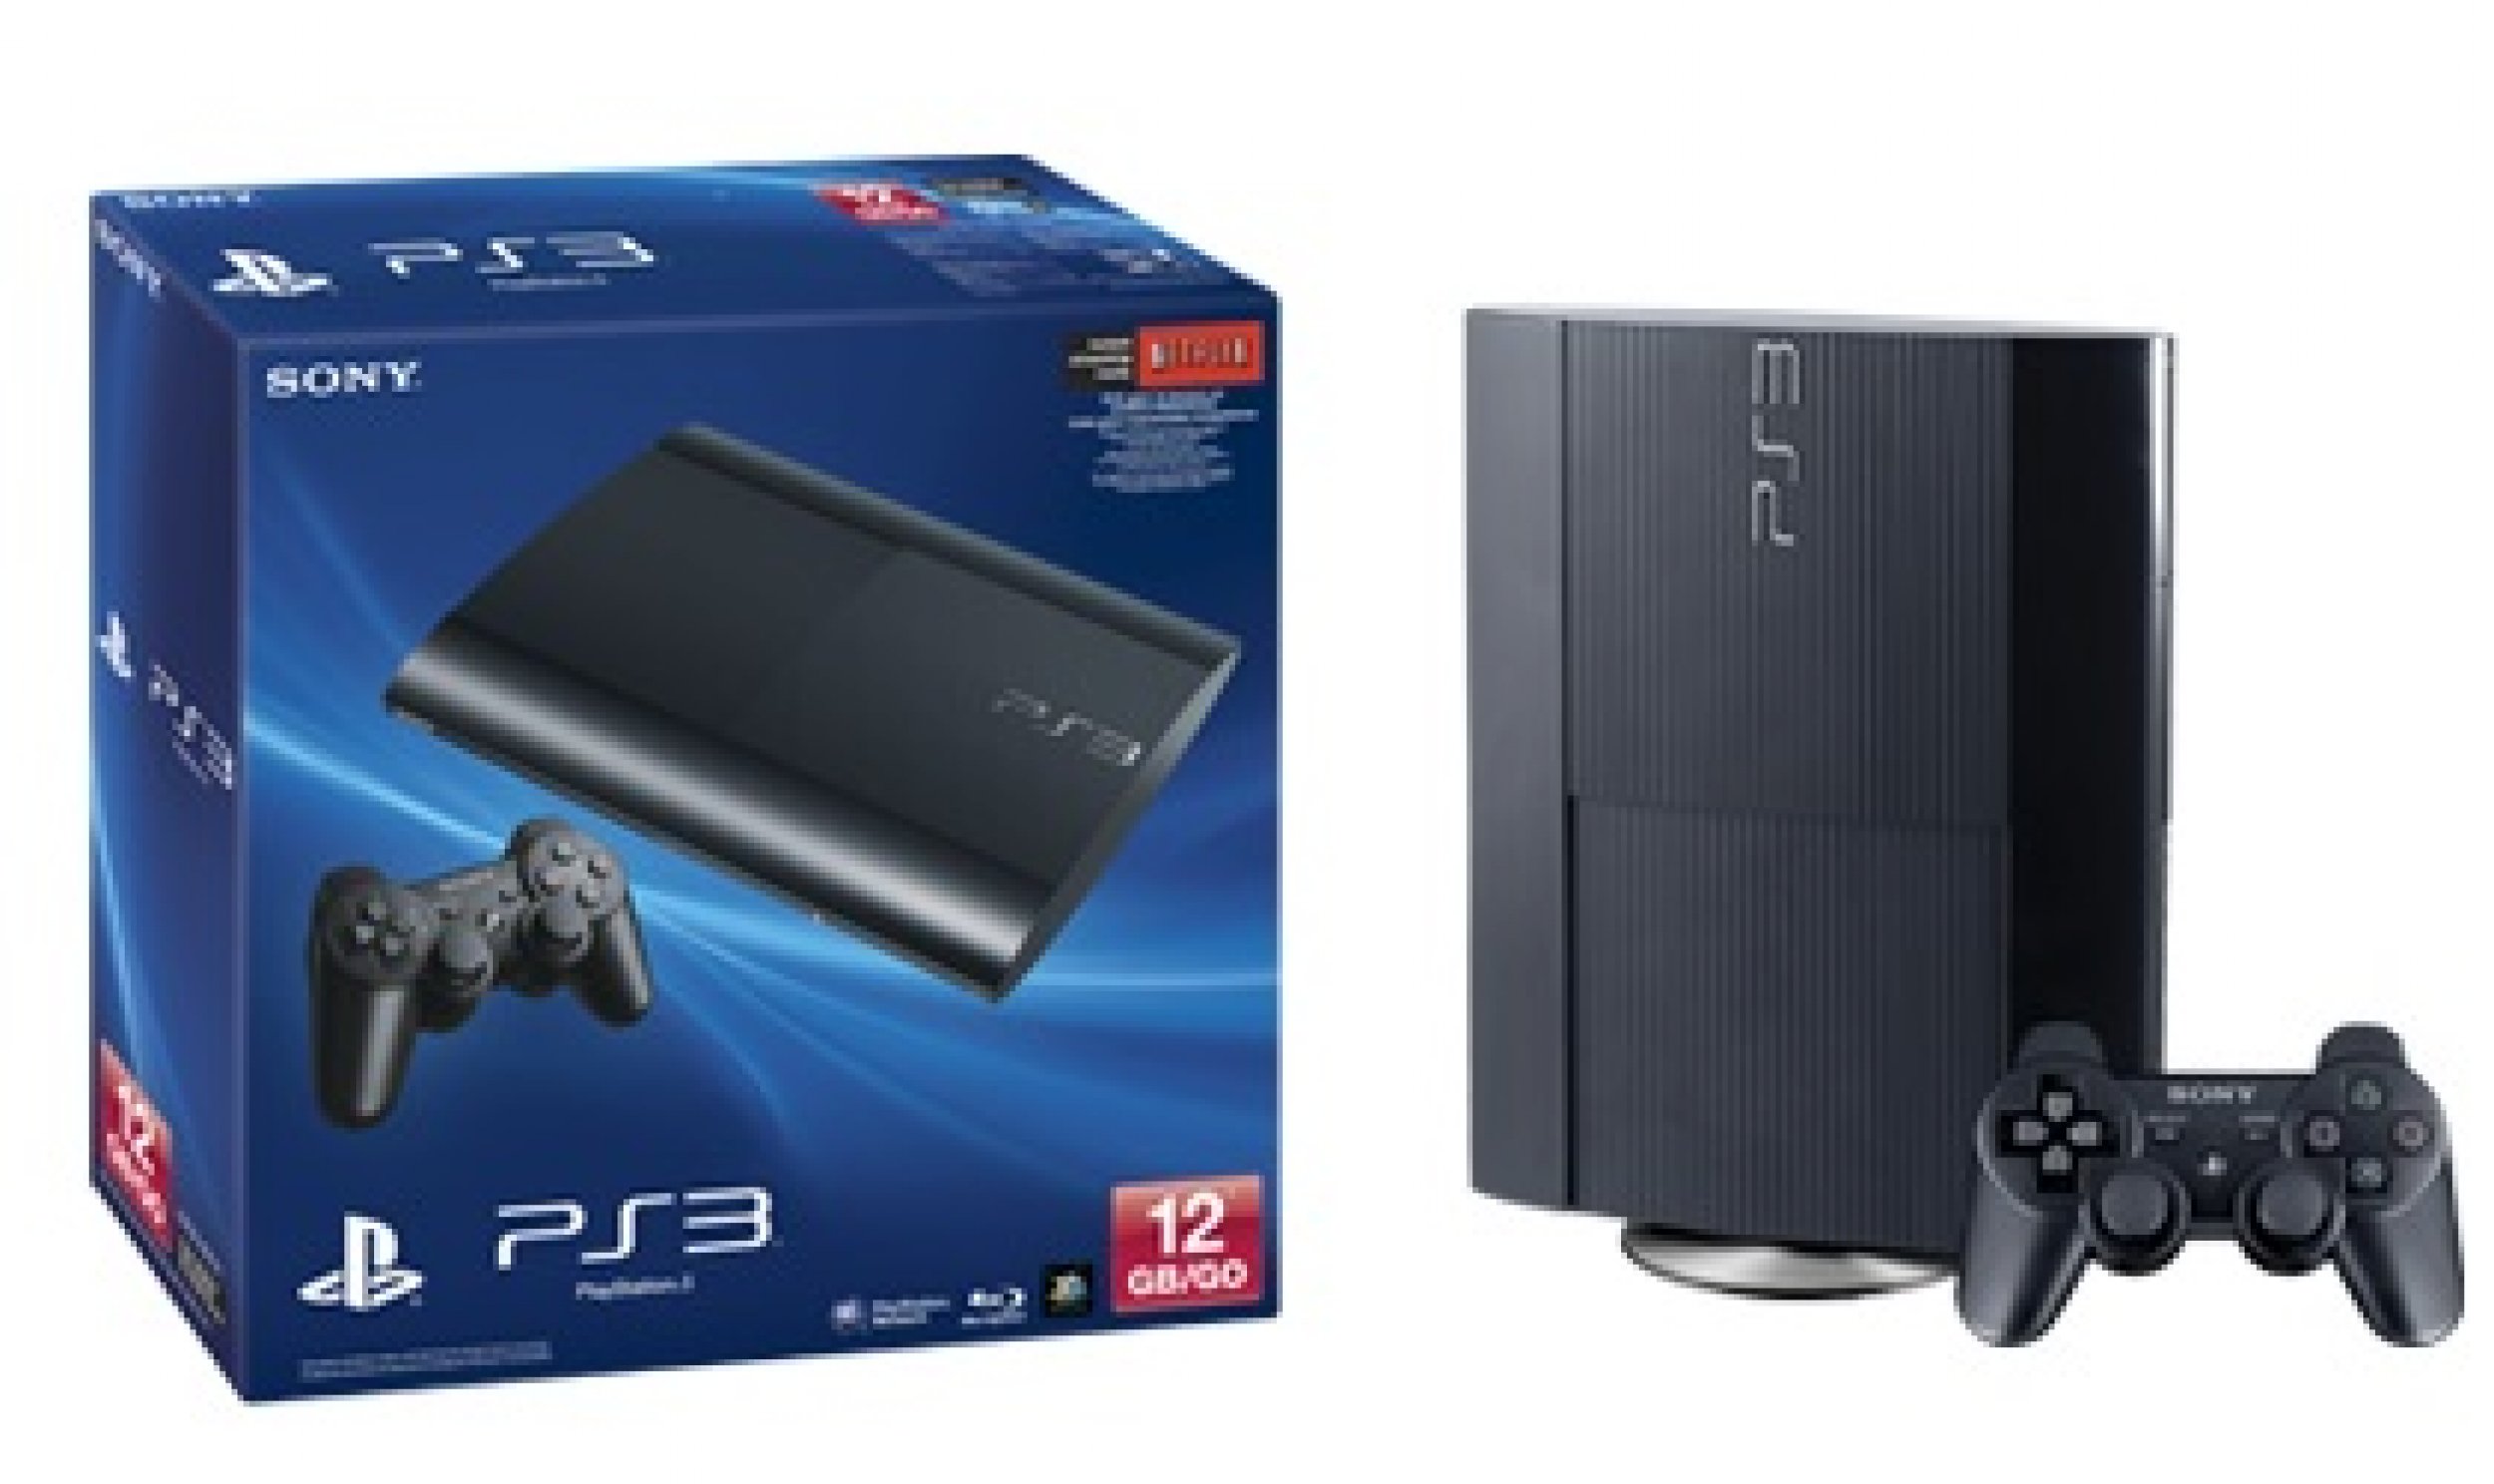 New Sony PS3 On Sale For $199 At Best Buy: Slim 12GB PlayStation 3 